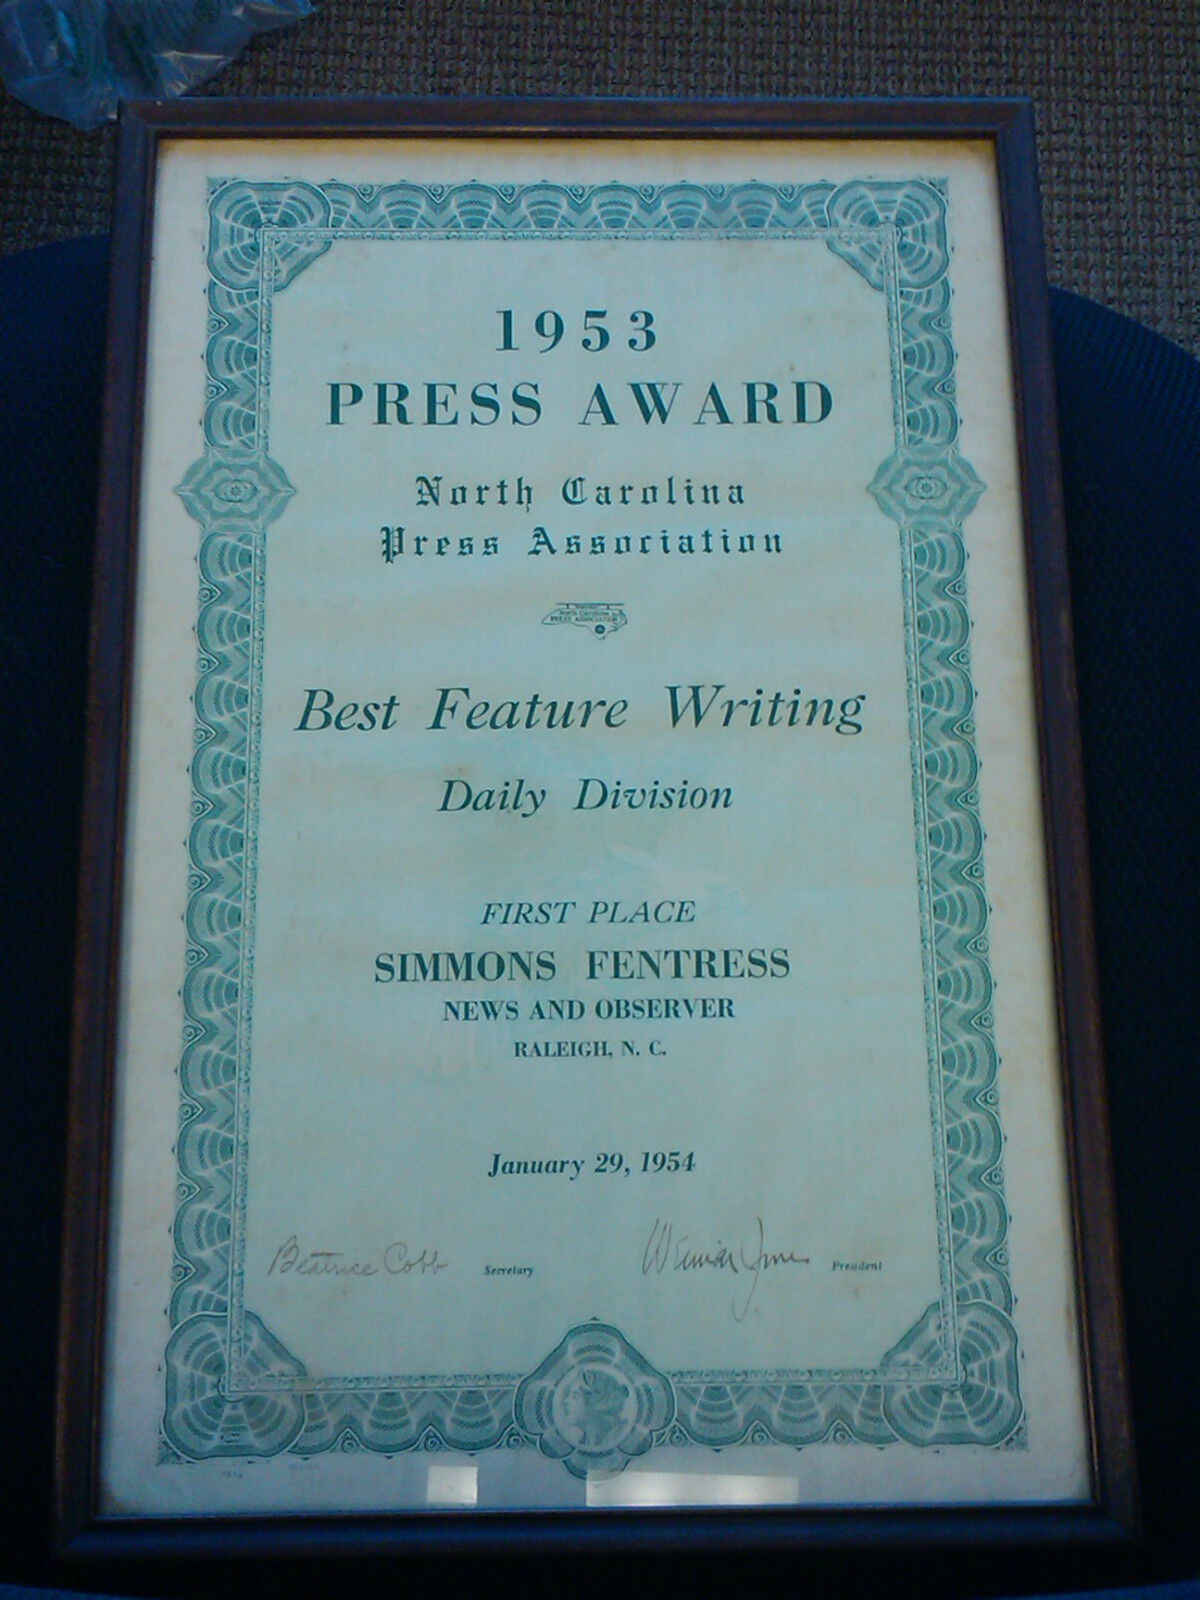 1953 North Carolina Press Award for well known journalist Simmons Fentress